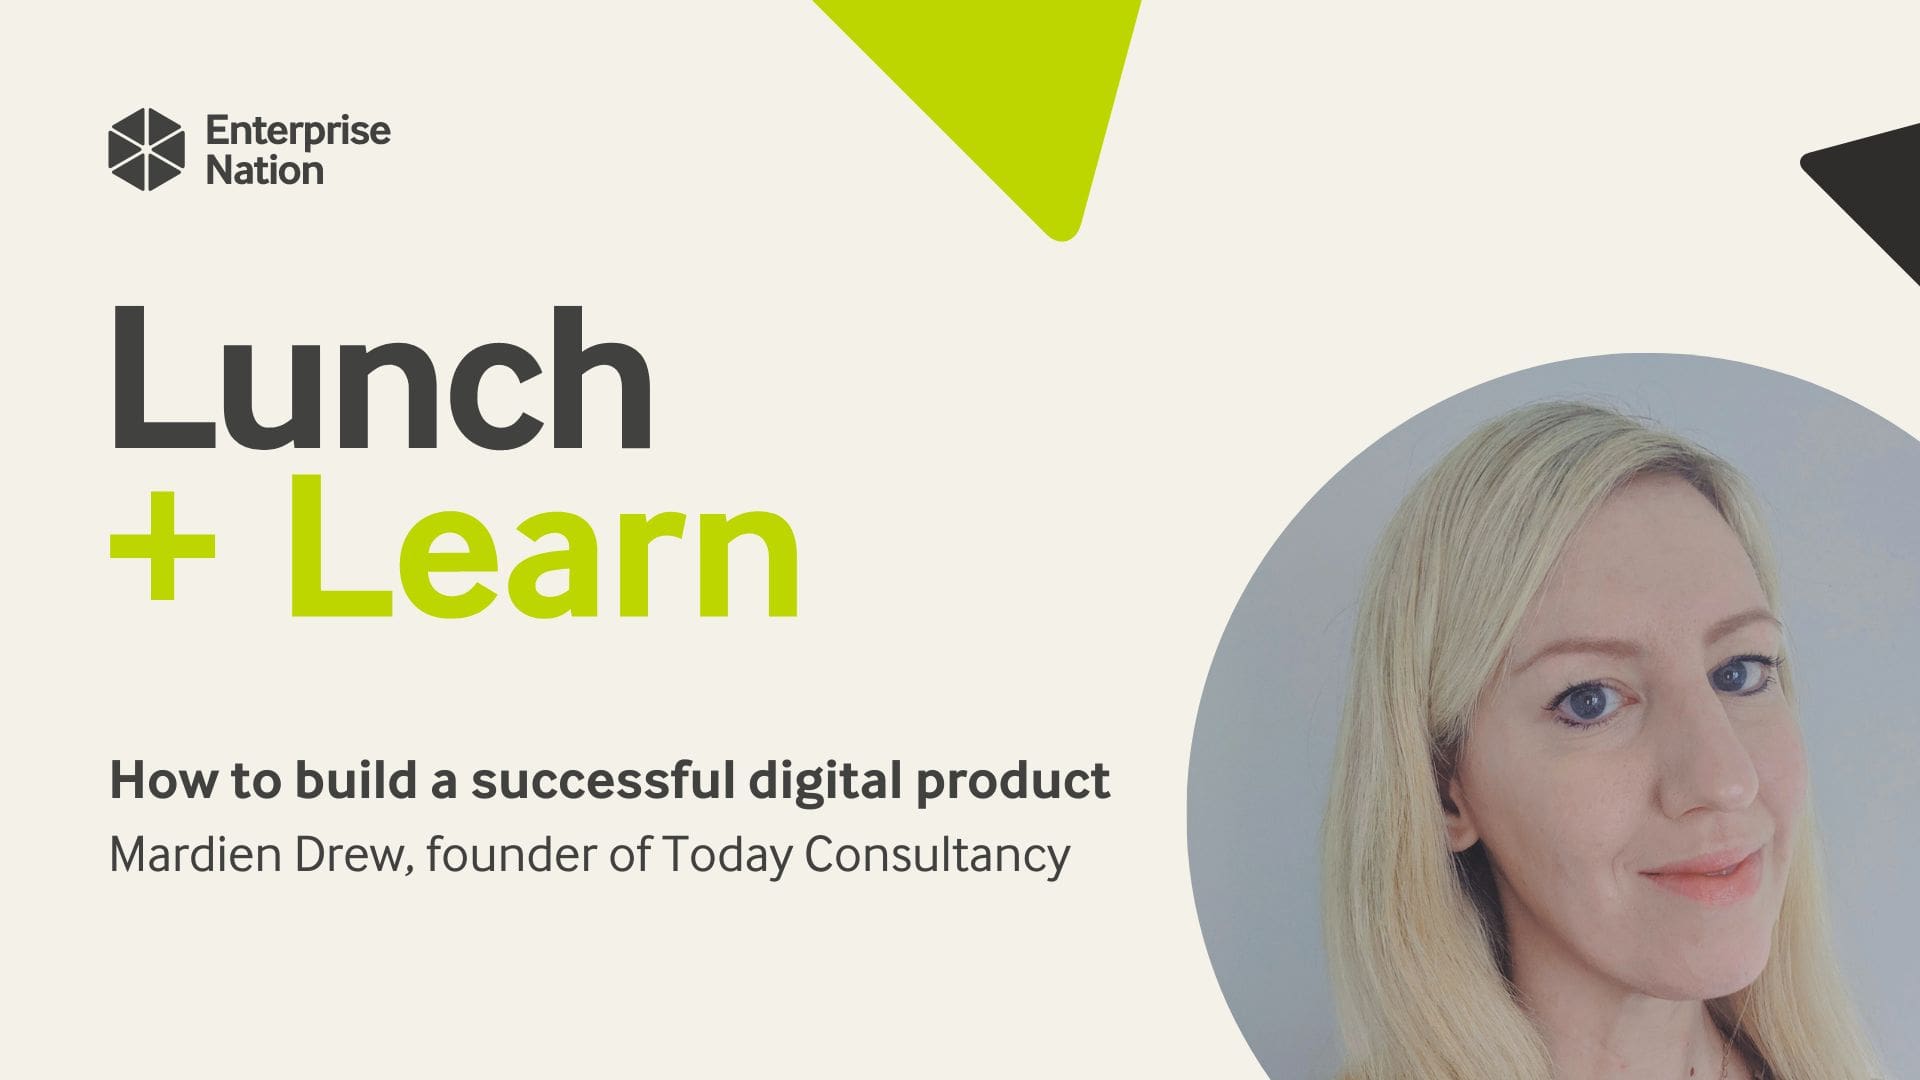 Lunch and Learn: How to build a successful digital product